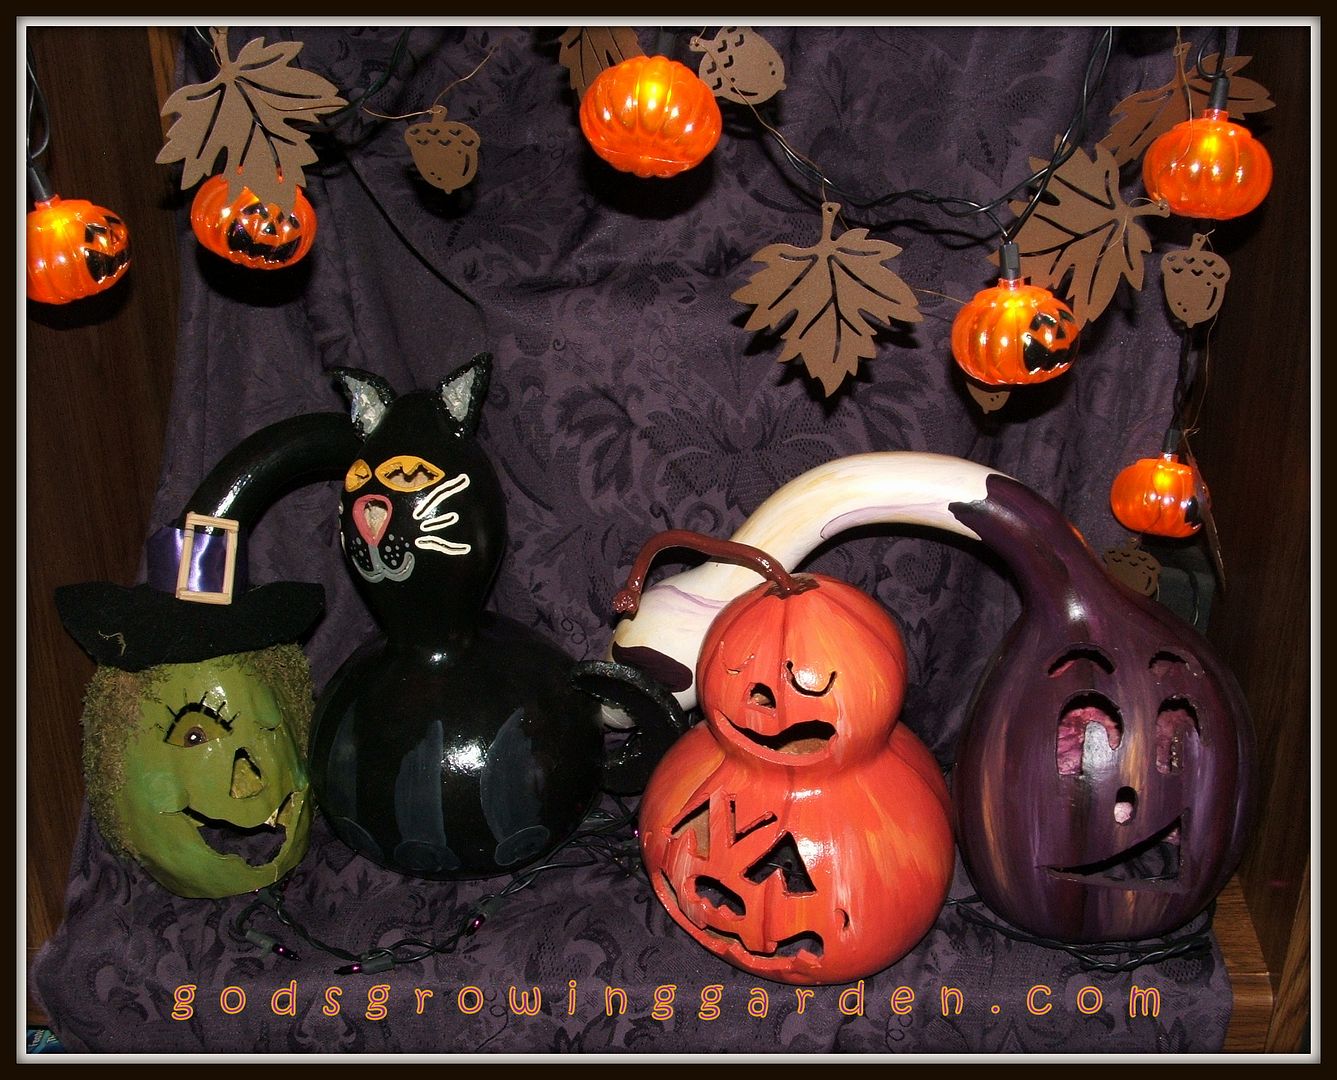 Gourd-o-lantern Babies by Angie Ouellette-Tower for godsgrowinggarden.com photo 010_zps4df6ea4c.jpg